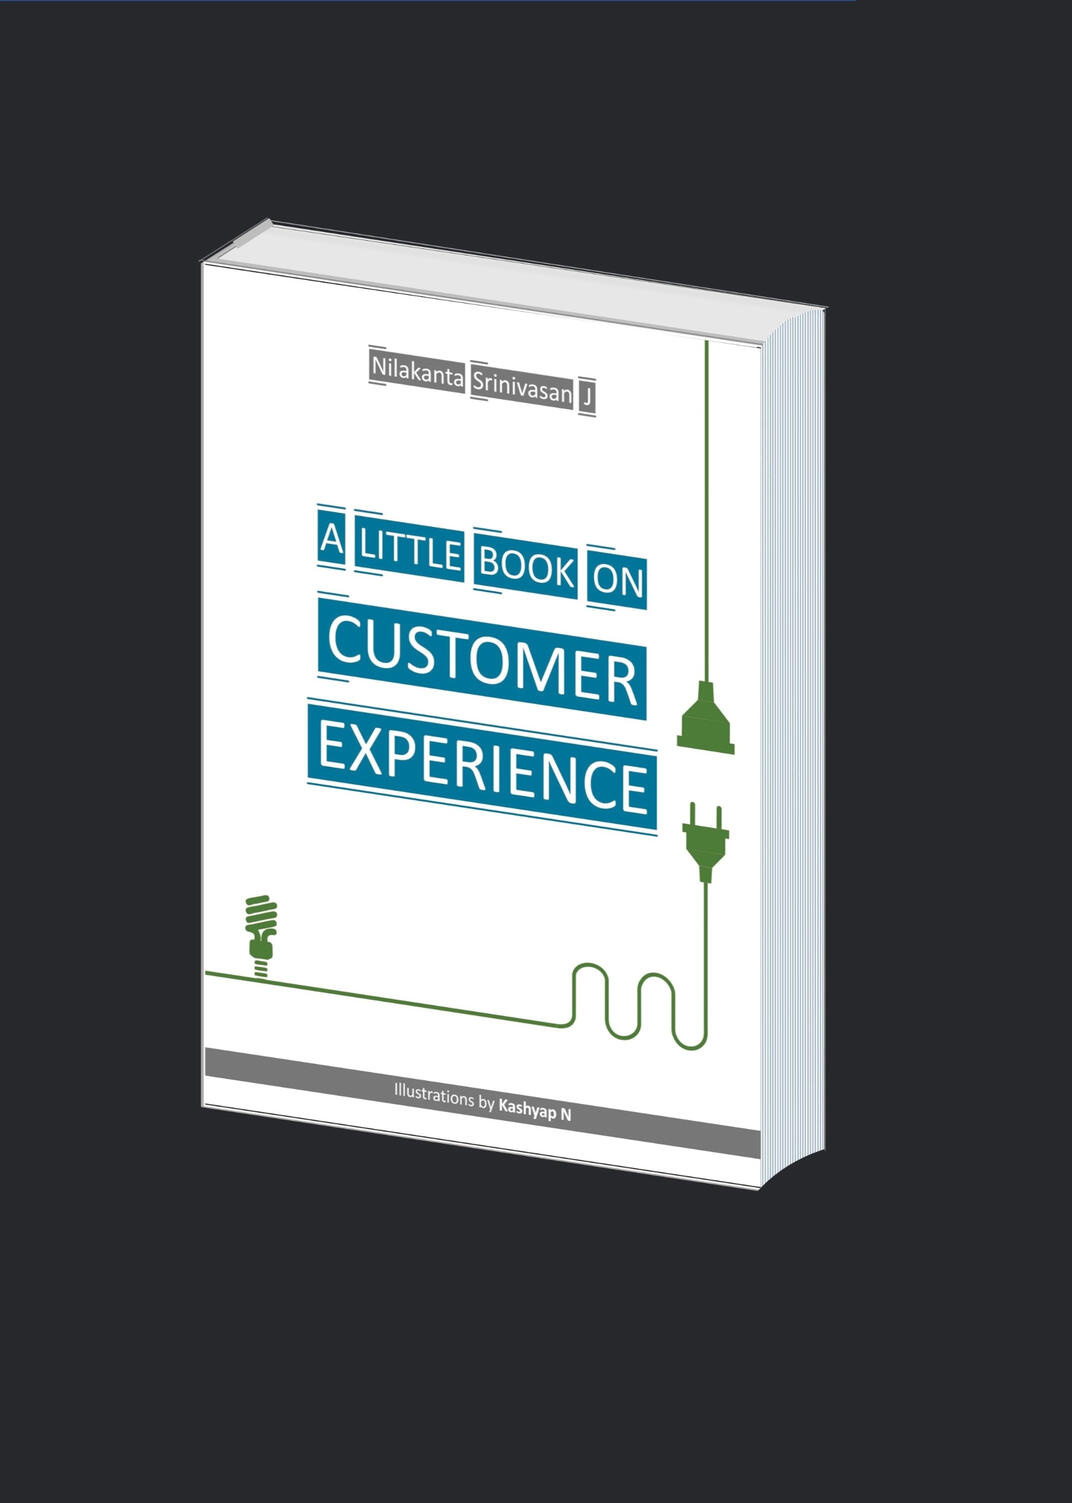 A Little Book on Customer Experience